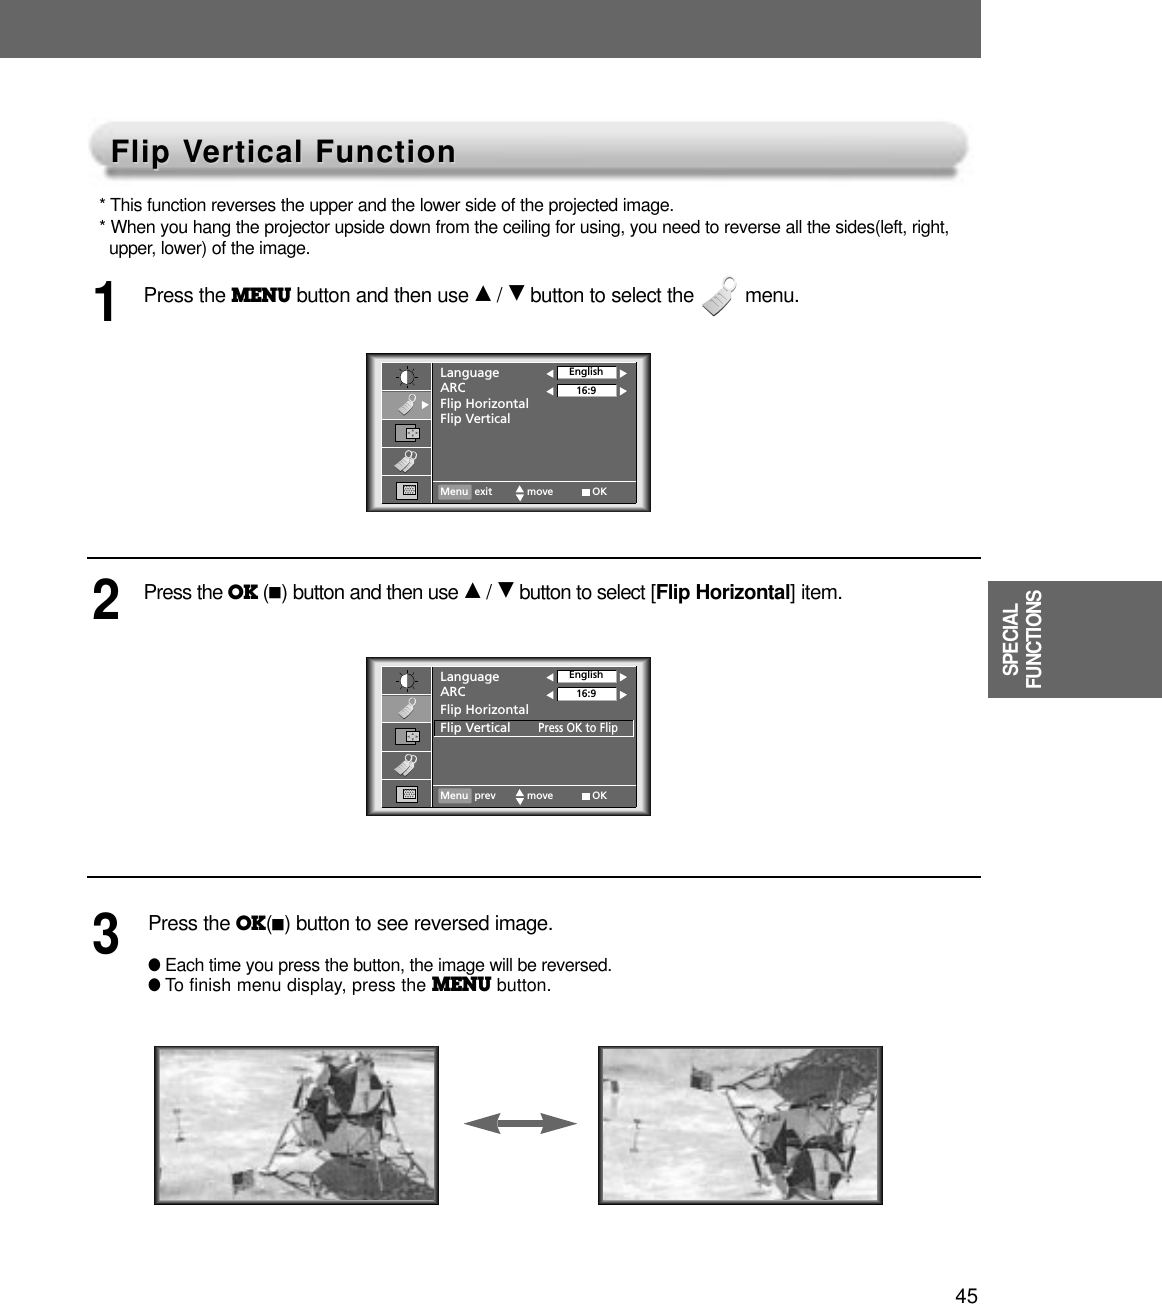 45SPECIALFUNCTIONSFlip VFlip Vertical Functionertical Function* This function reverses the upper and the lower side of the projected image. * When you hang the projector upside down from the ceiling for using, you need to reverse all the sides(left, right, upper, lower) of the image.Press the MENU button and then use D/ Ebutton to select the         menu.1Press the OK (A)button and then use D/ Ebutton to select [Flip Horizontal] item.Press the OK(A)button to see reversed image.●Each time you press the button, the image will be reversed.●To finish menu display, press the MENU button.23LanguageARCFlip HorizontalFlip VerticalEnglish16:9Menu exit move OKLanguageARCFlip HorizontalFlip VerticalPress OK to FlipEnglish16:9Menu prev move OK